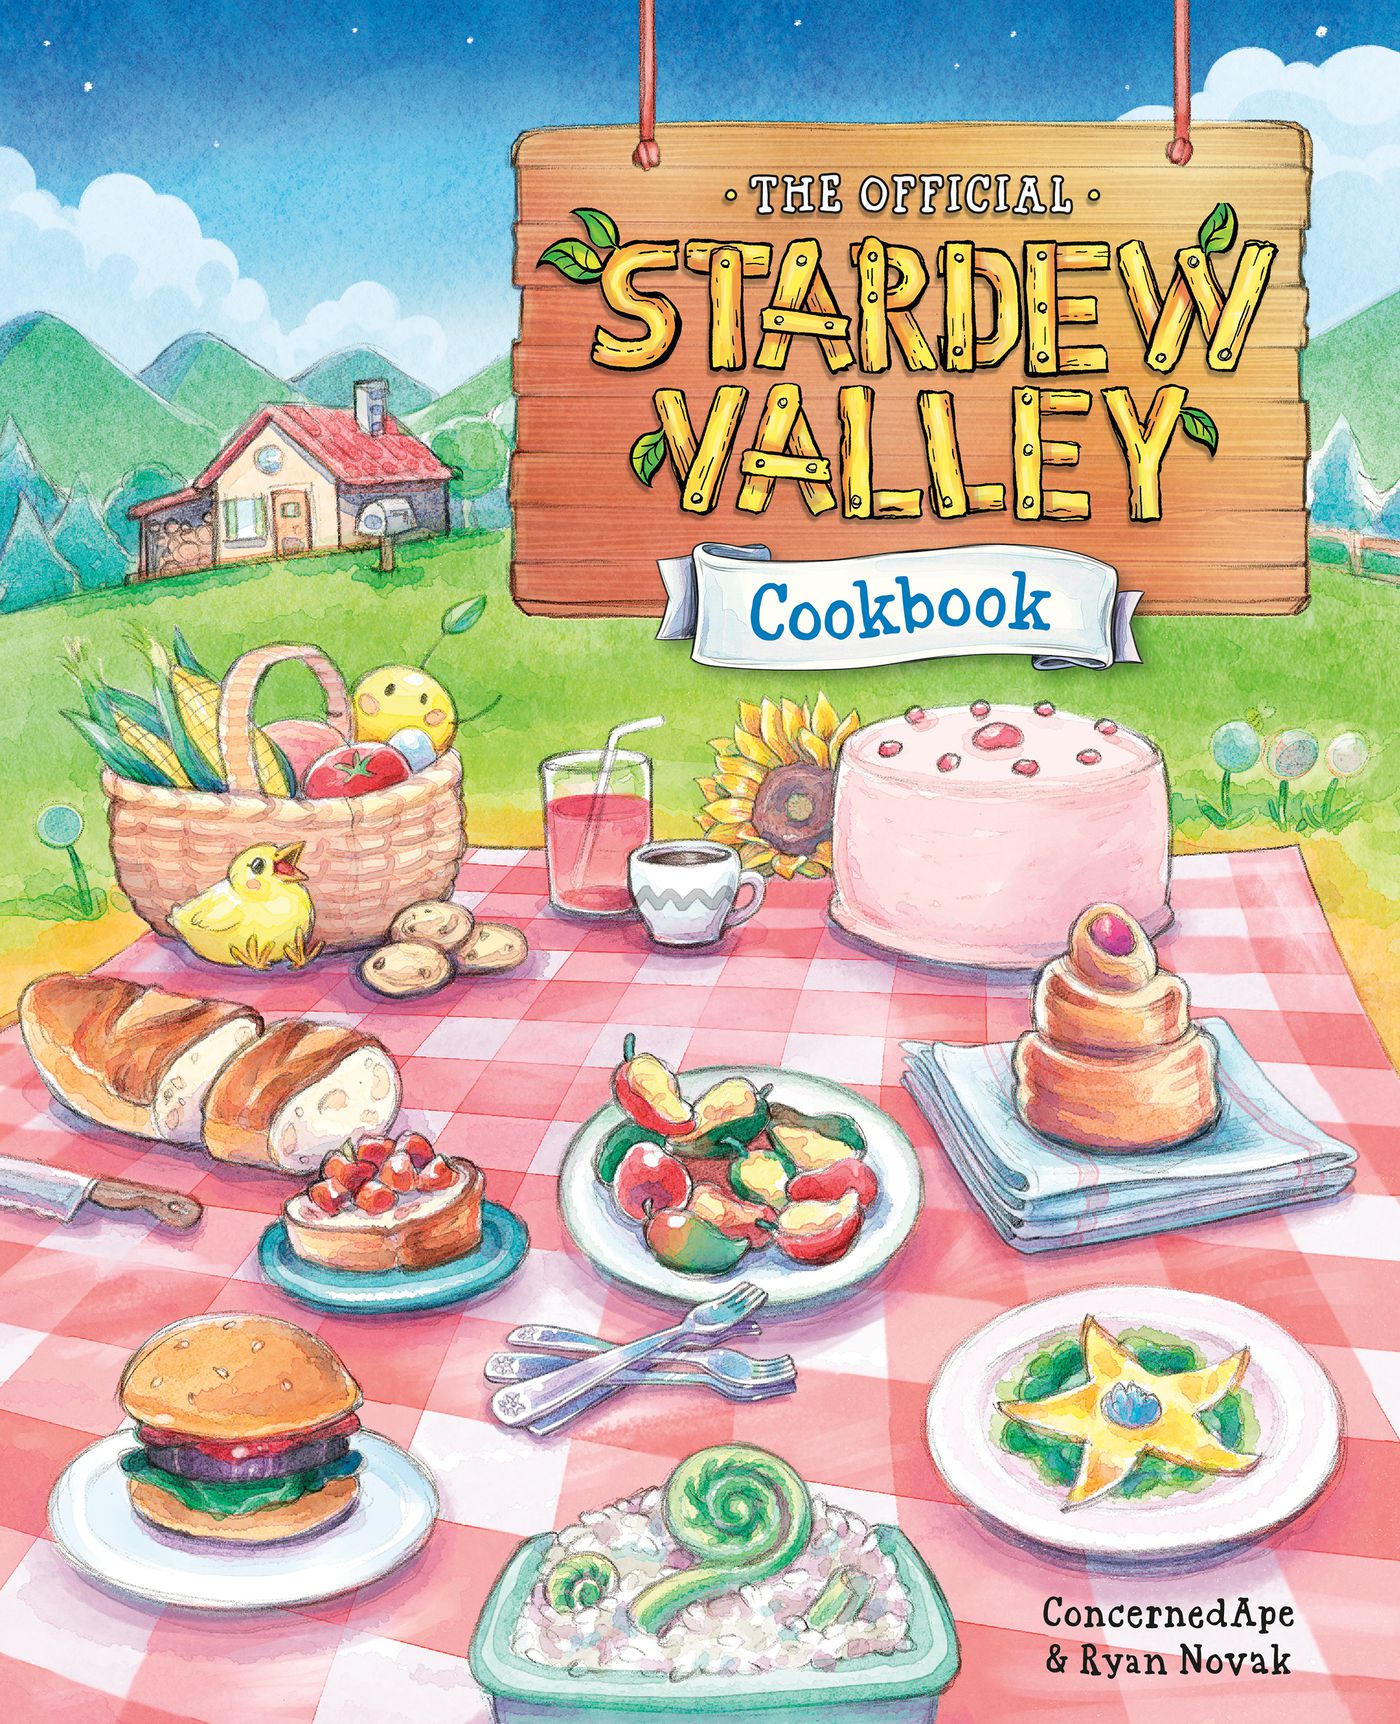 a new cookbook brings the beloved recipes of ‘stardew valley’ to life